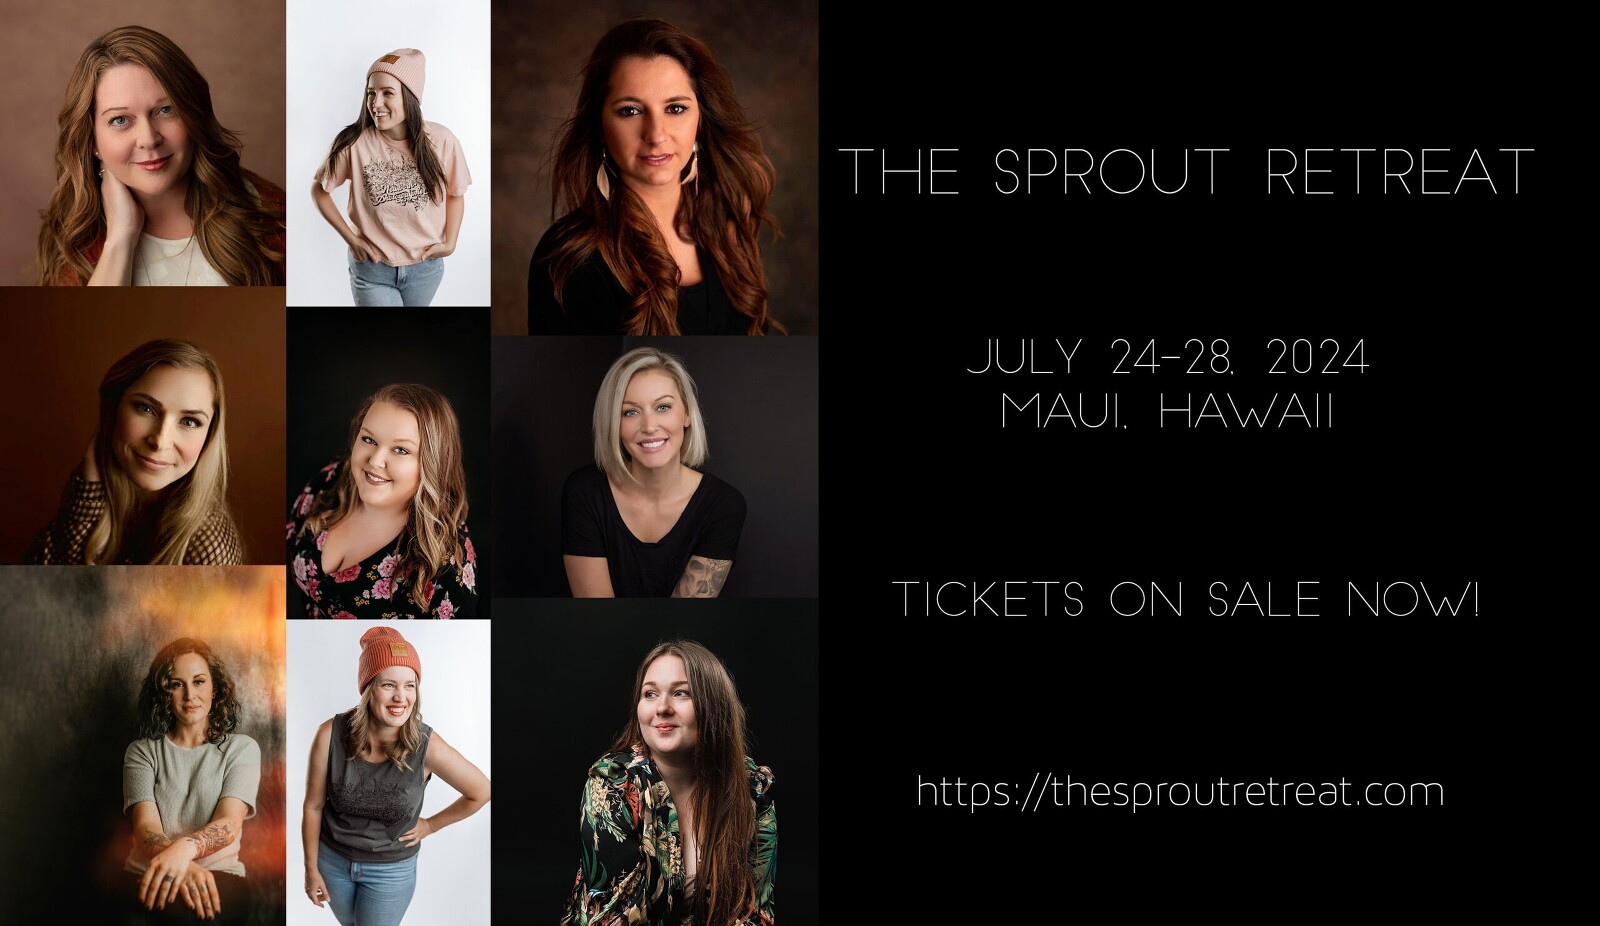 The Sprout Retreat